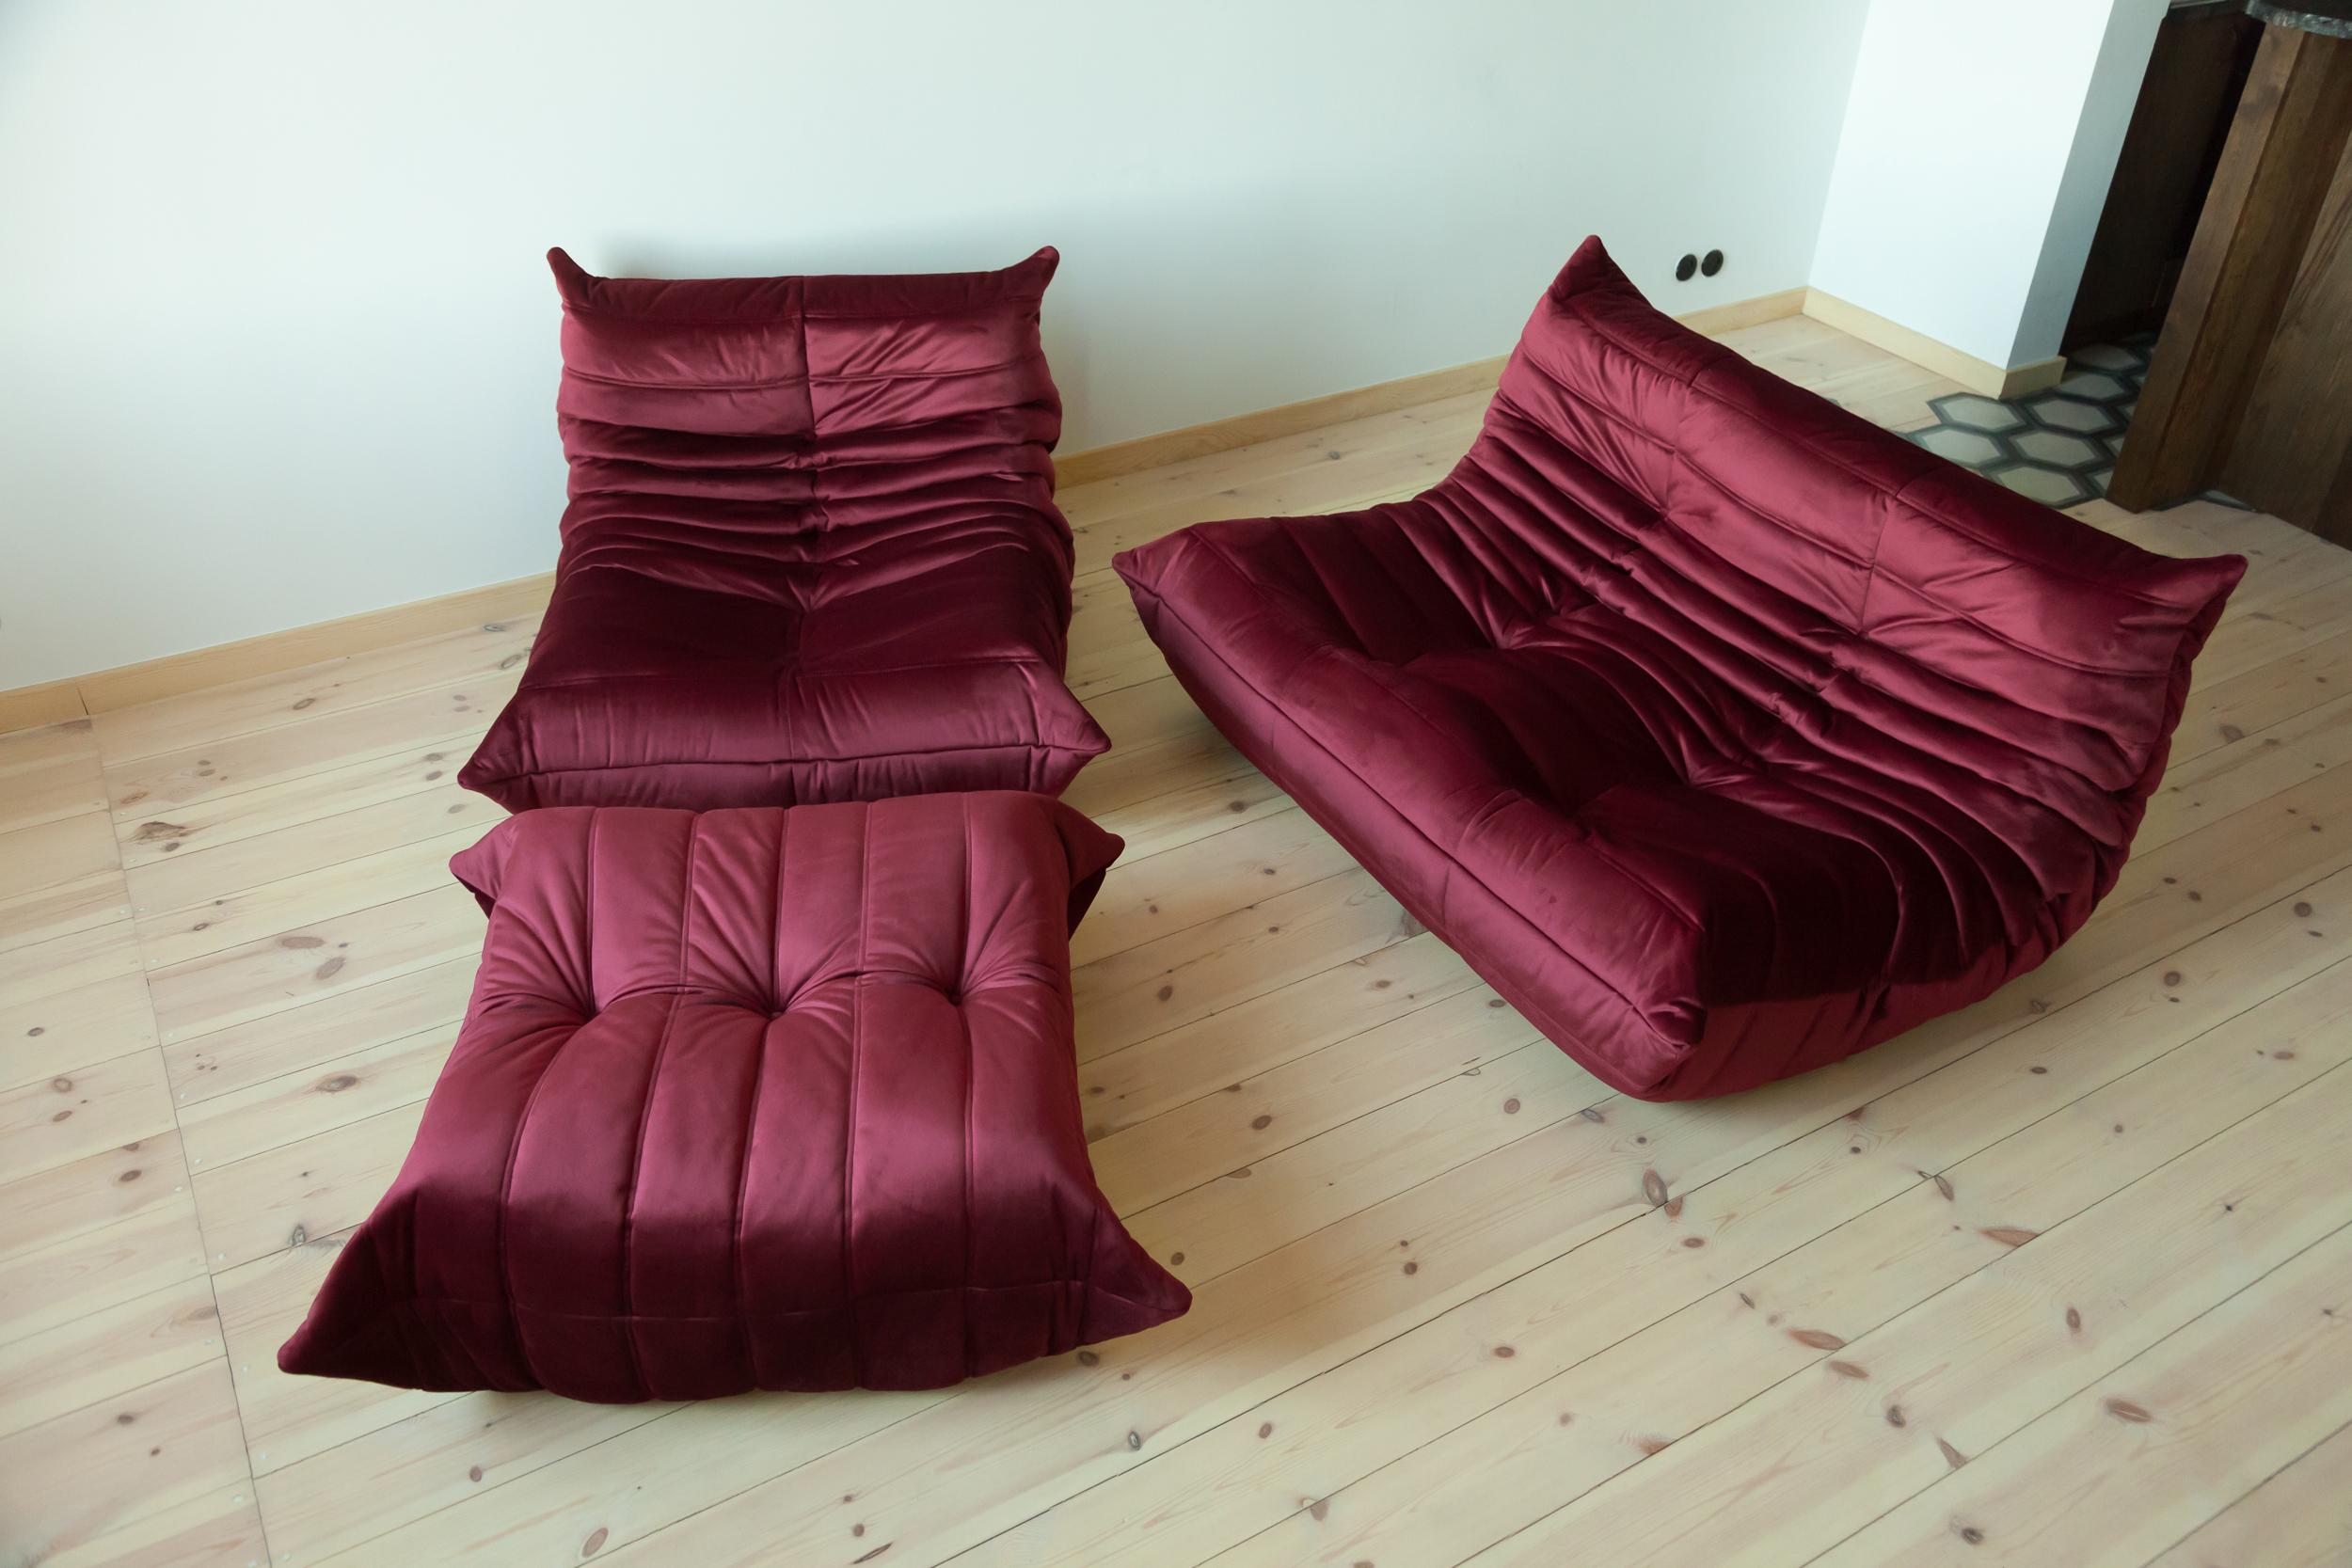 This Togo living room set was designed by Michel Ducaroy in 1973 and was manufactured by Ligne Roset in France. It has been reupholstered in burgundy high quality velvet, and is made up of the following pieces, each with the original Ligne Roset